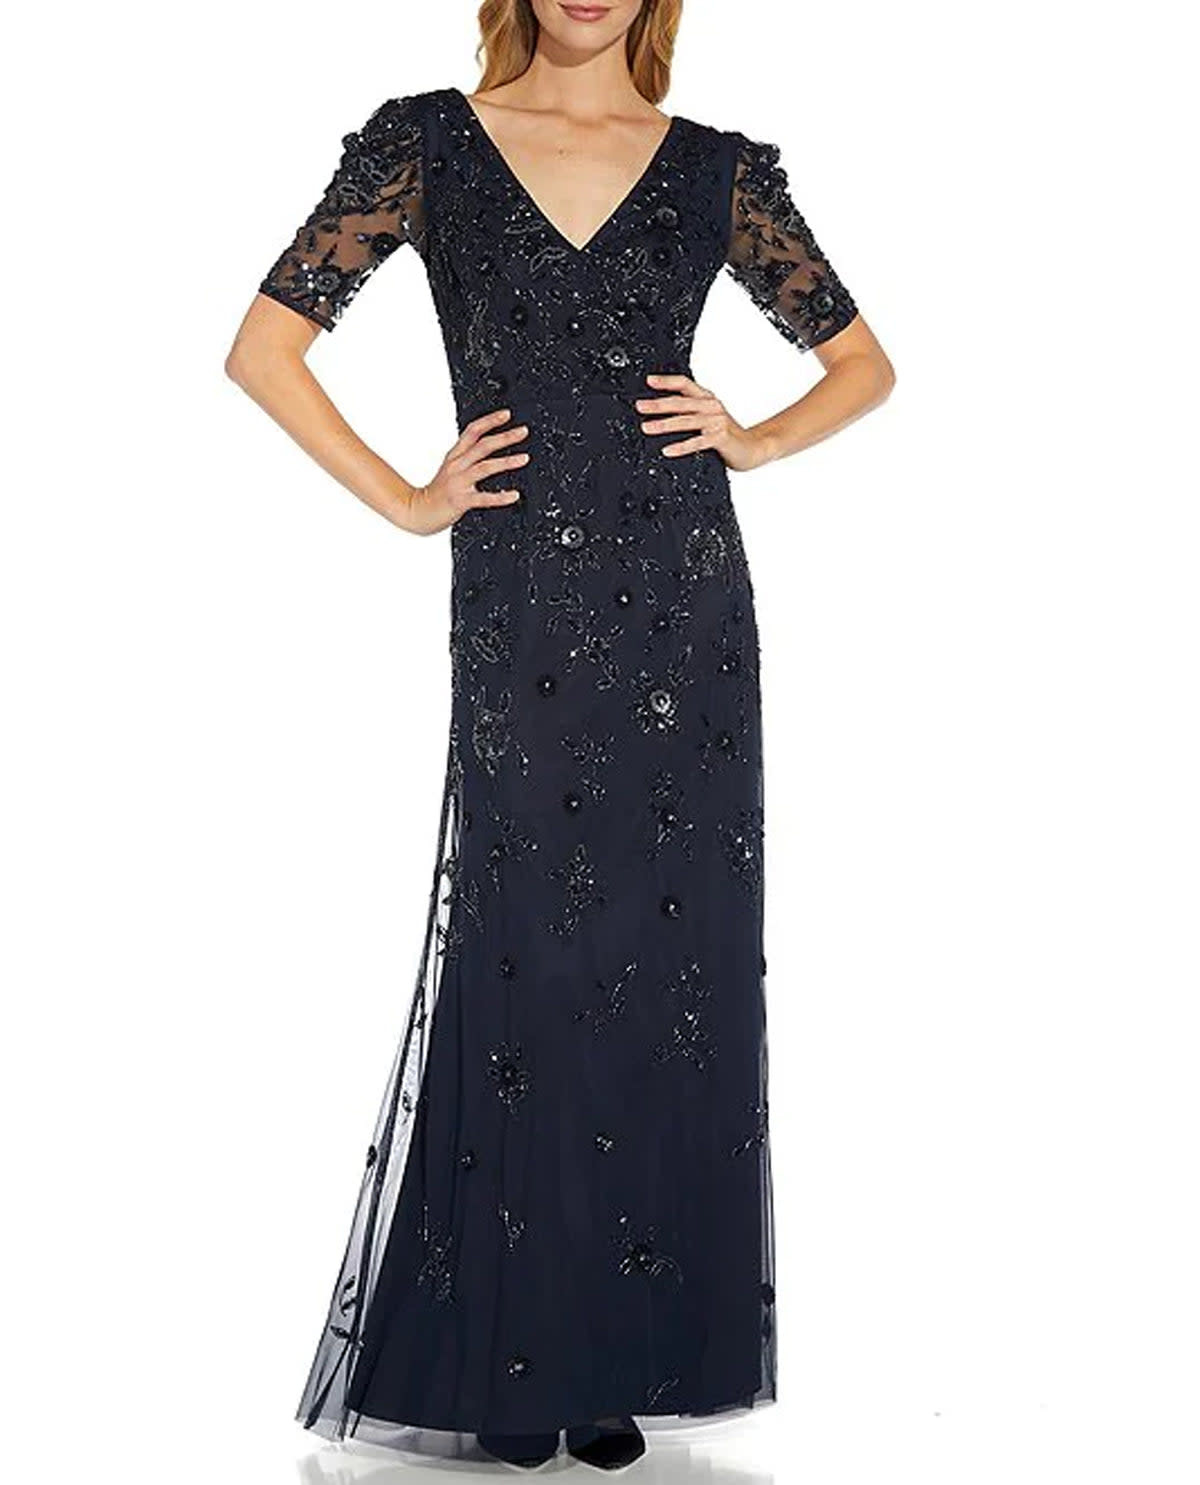 ADRIANNA PAPELL ADRIANNA PAPELL BEADED SURPLICE LONG GOWNS